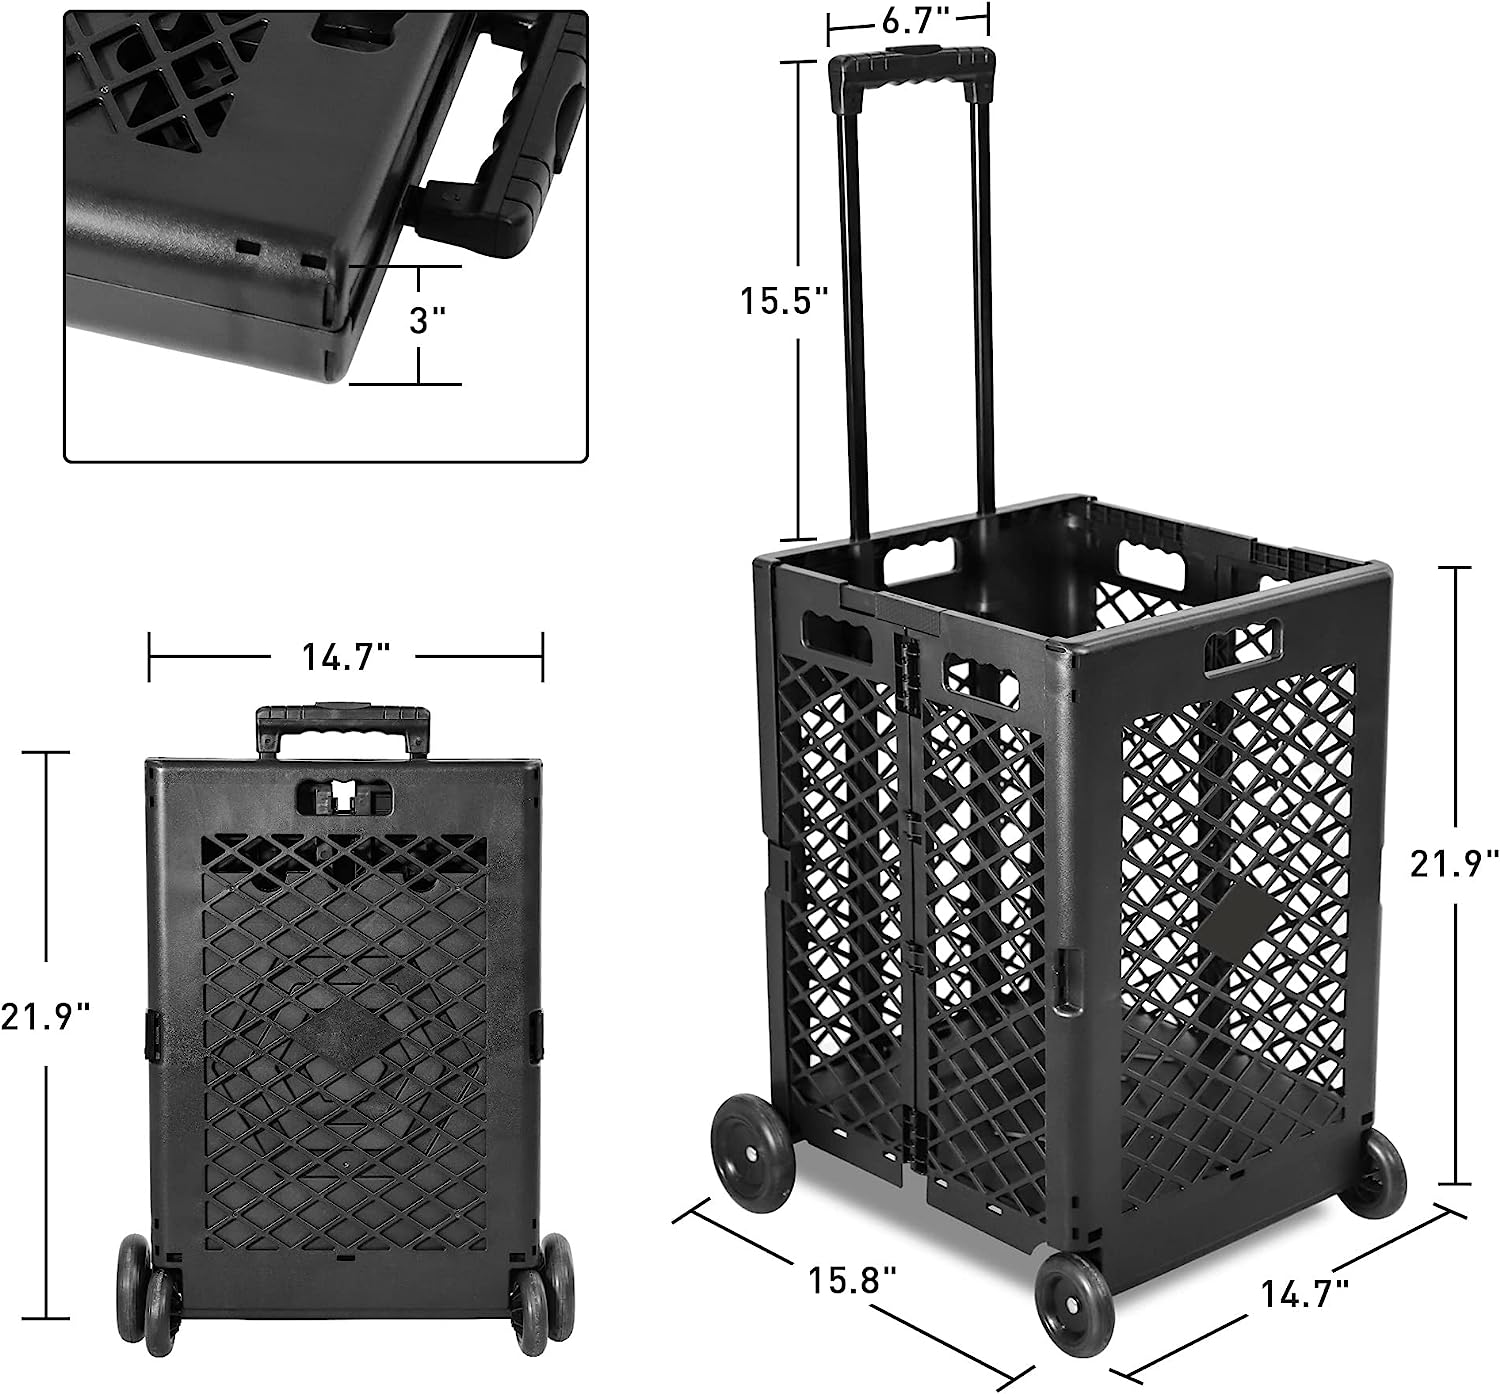 Luckyermore 66lbs Capacity Foldable Rolling Crate with Wheels Collapsible Basket with Telescopic Handle, Black